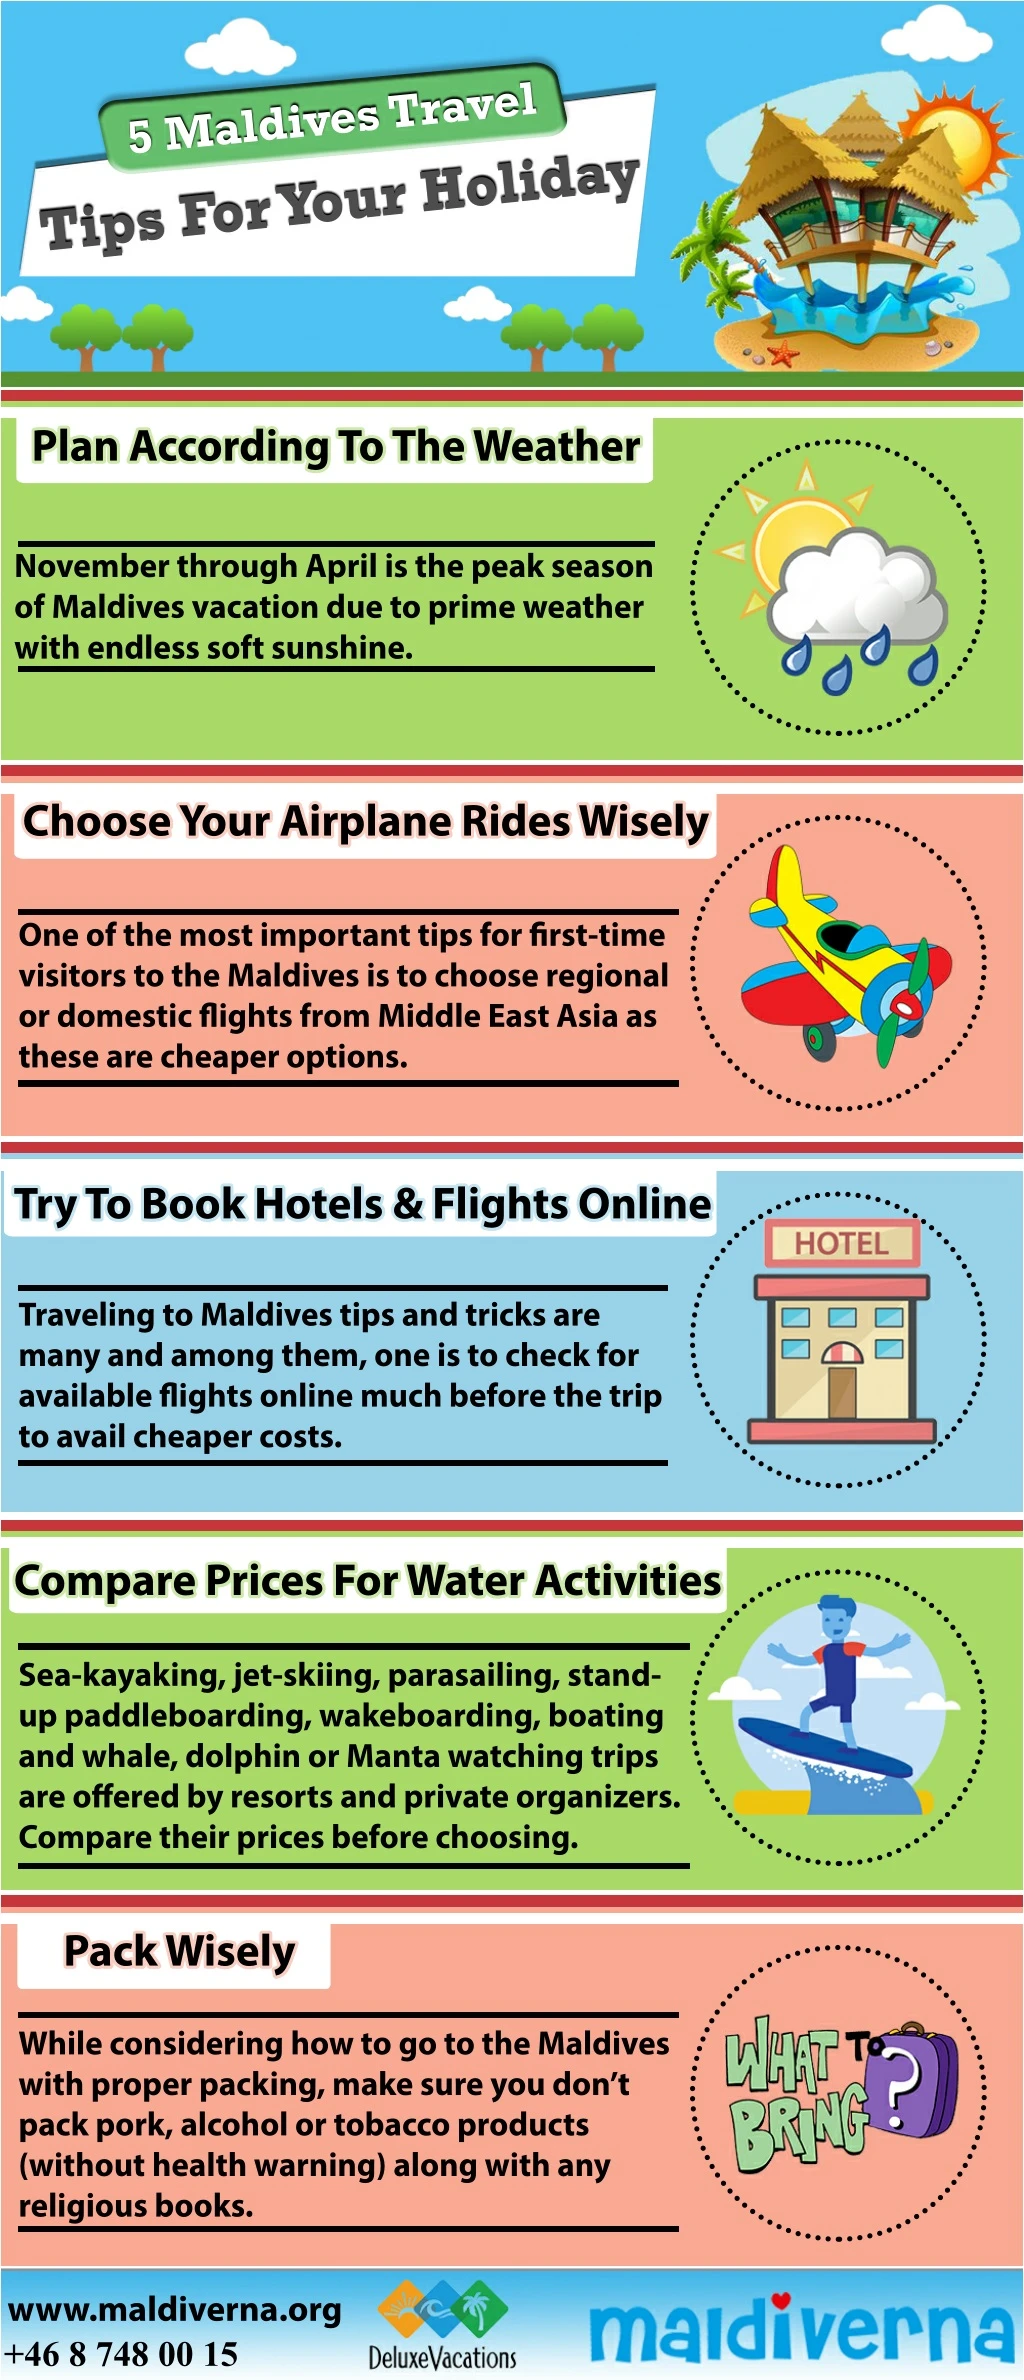 5 maldives travel tips for your holiday